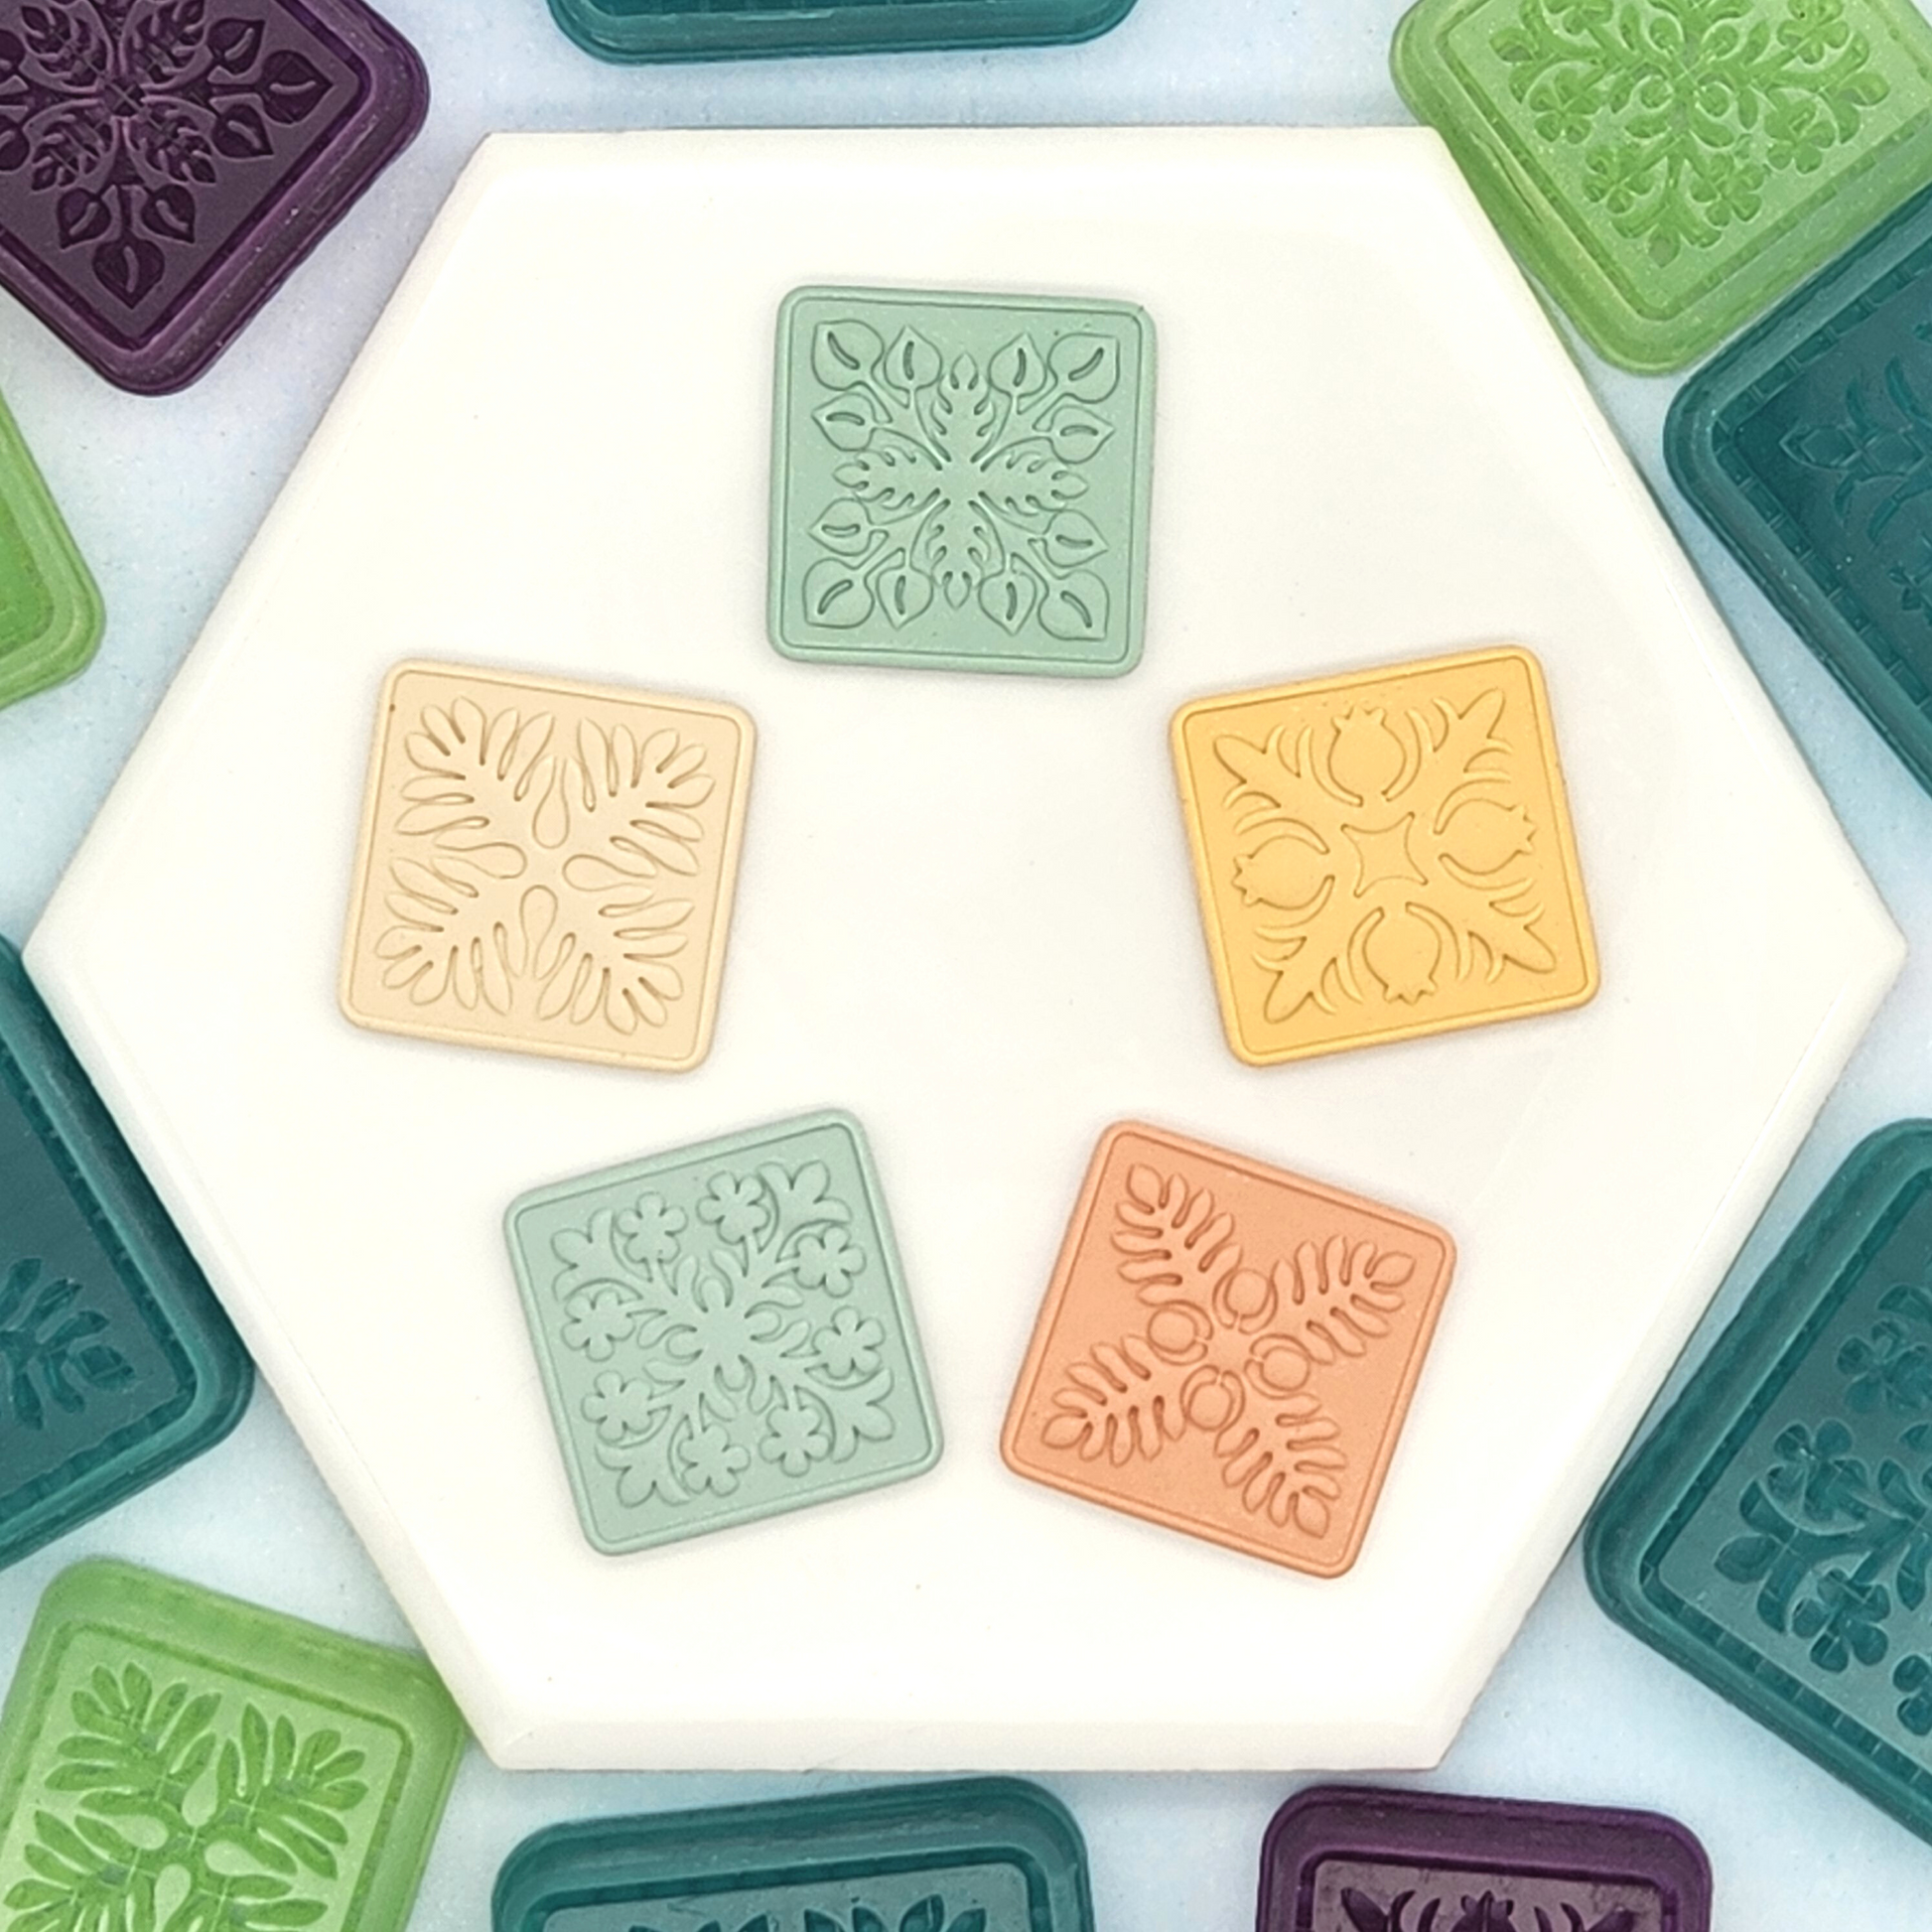 Polymer Clay Cutter Cutter Set of 7 Embossing Stamps Botanical